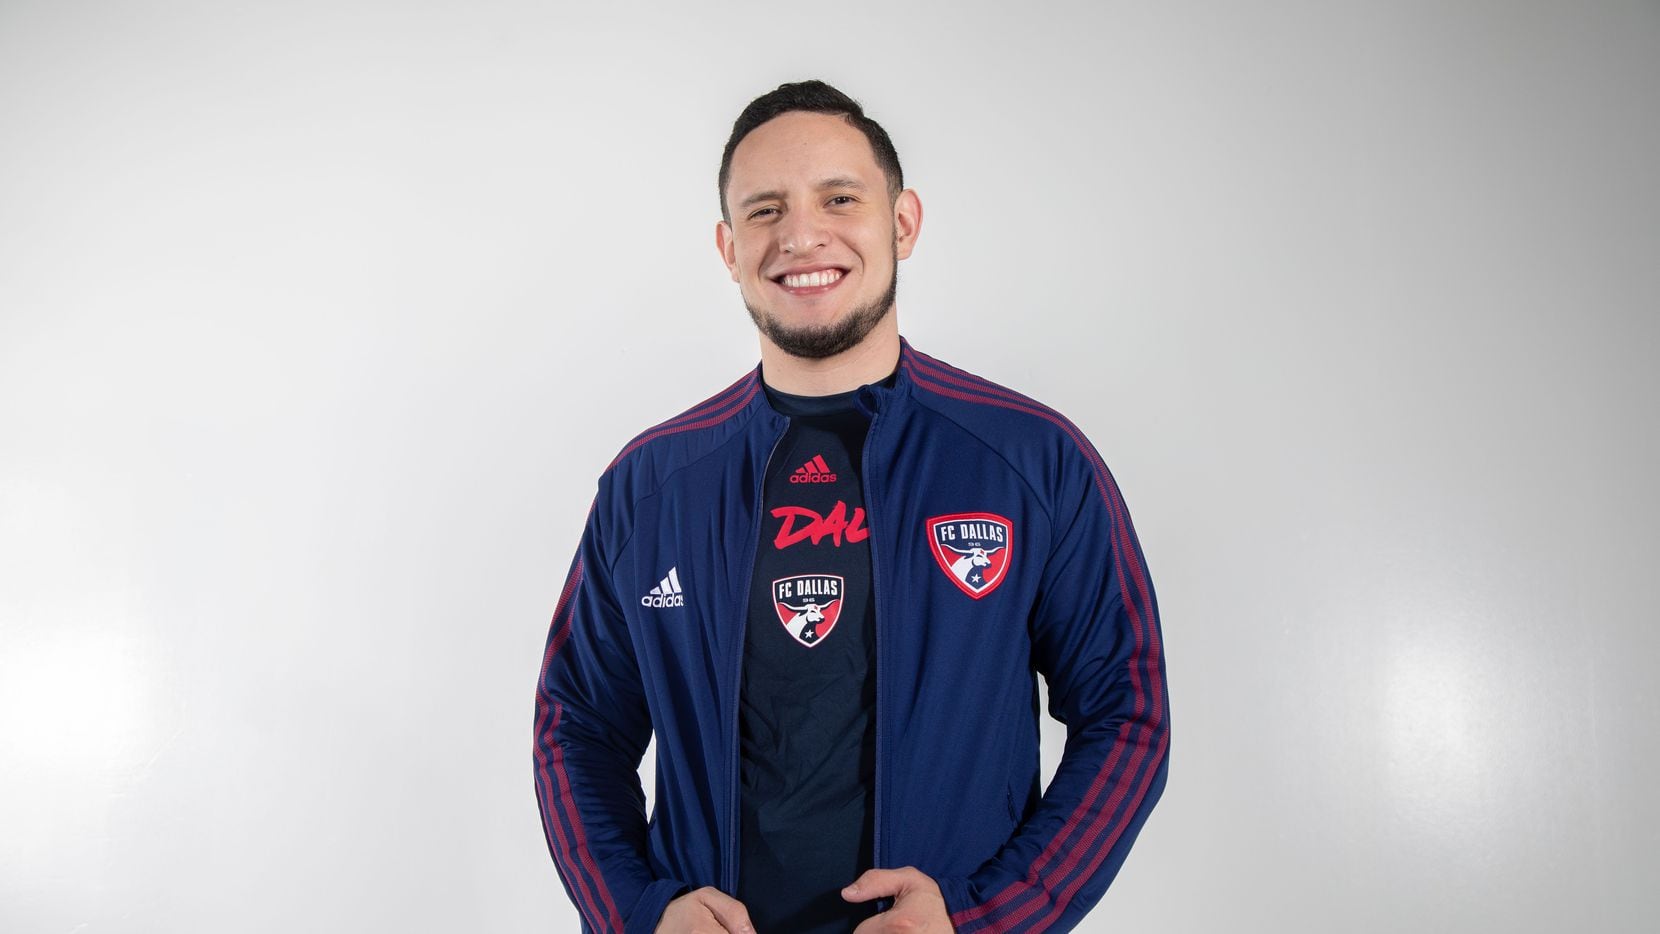 Alan "AlanAvi" Avila returned to FC Dallas as its eMLS player. He will still be working with...